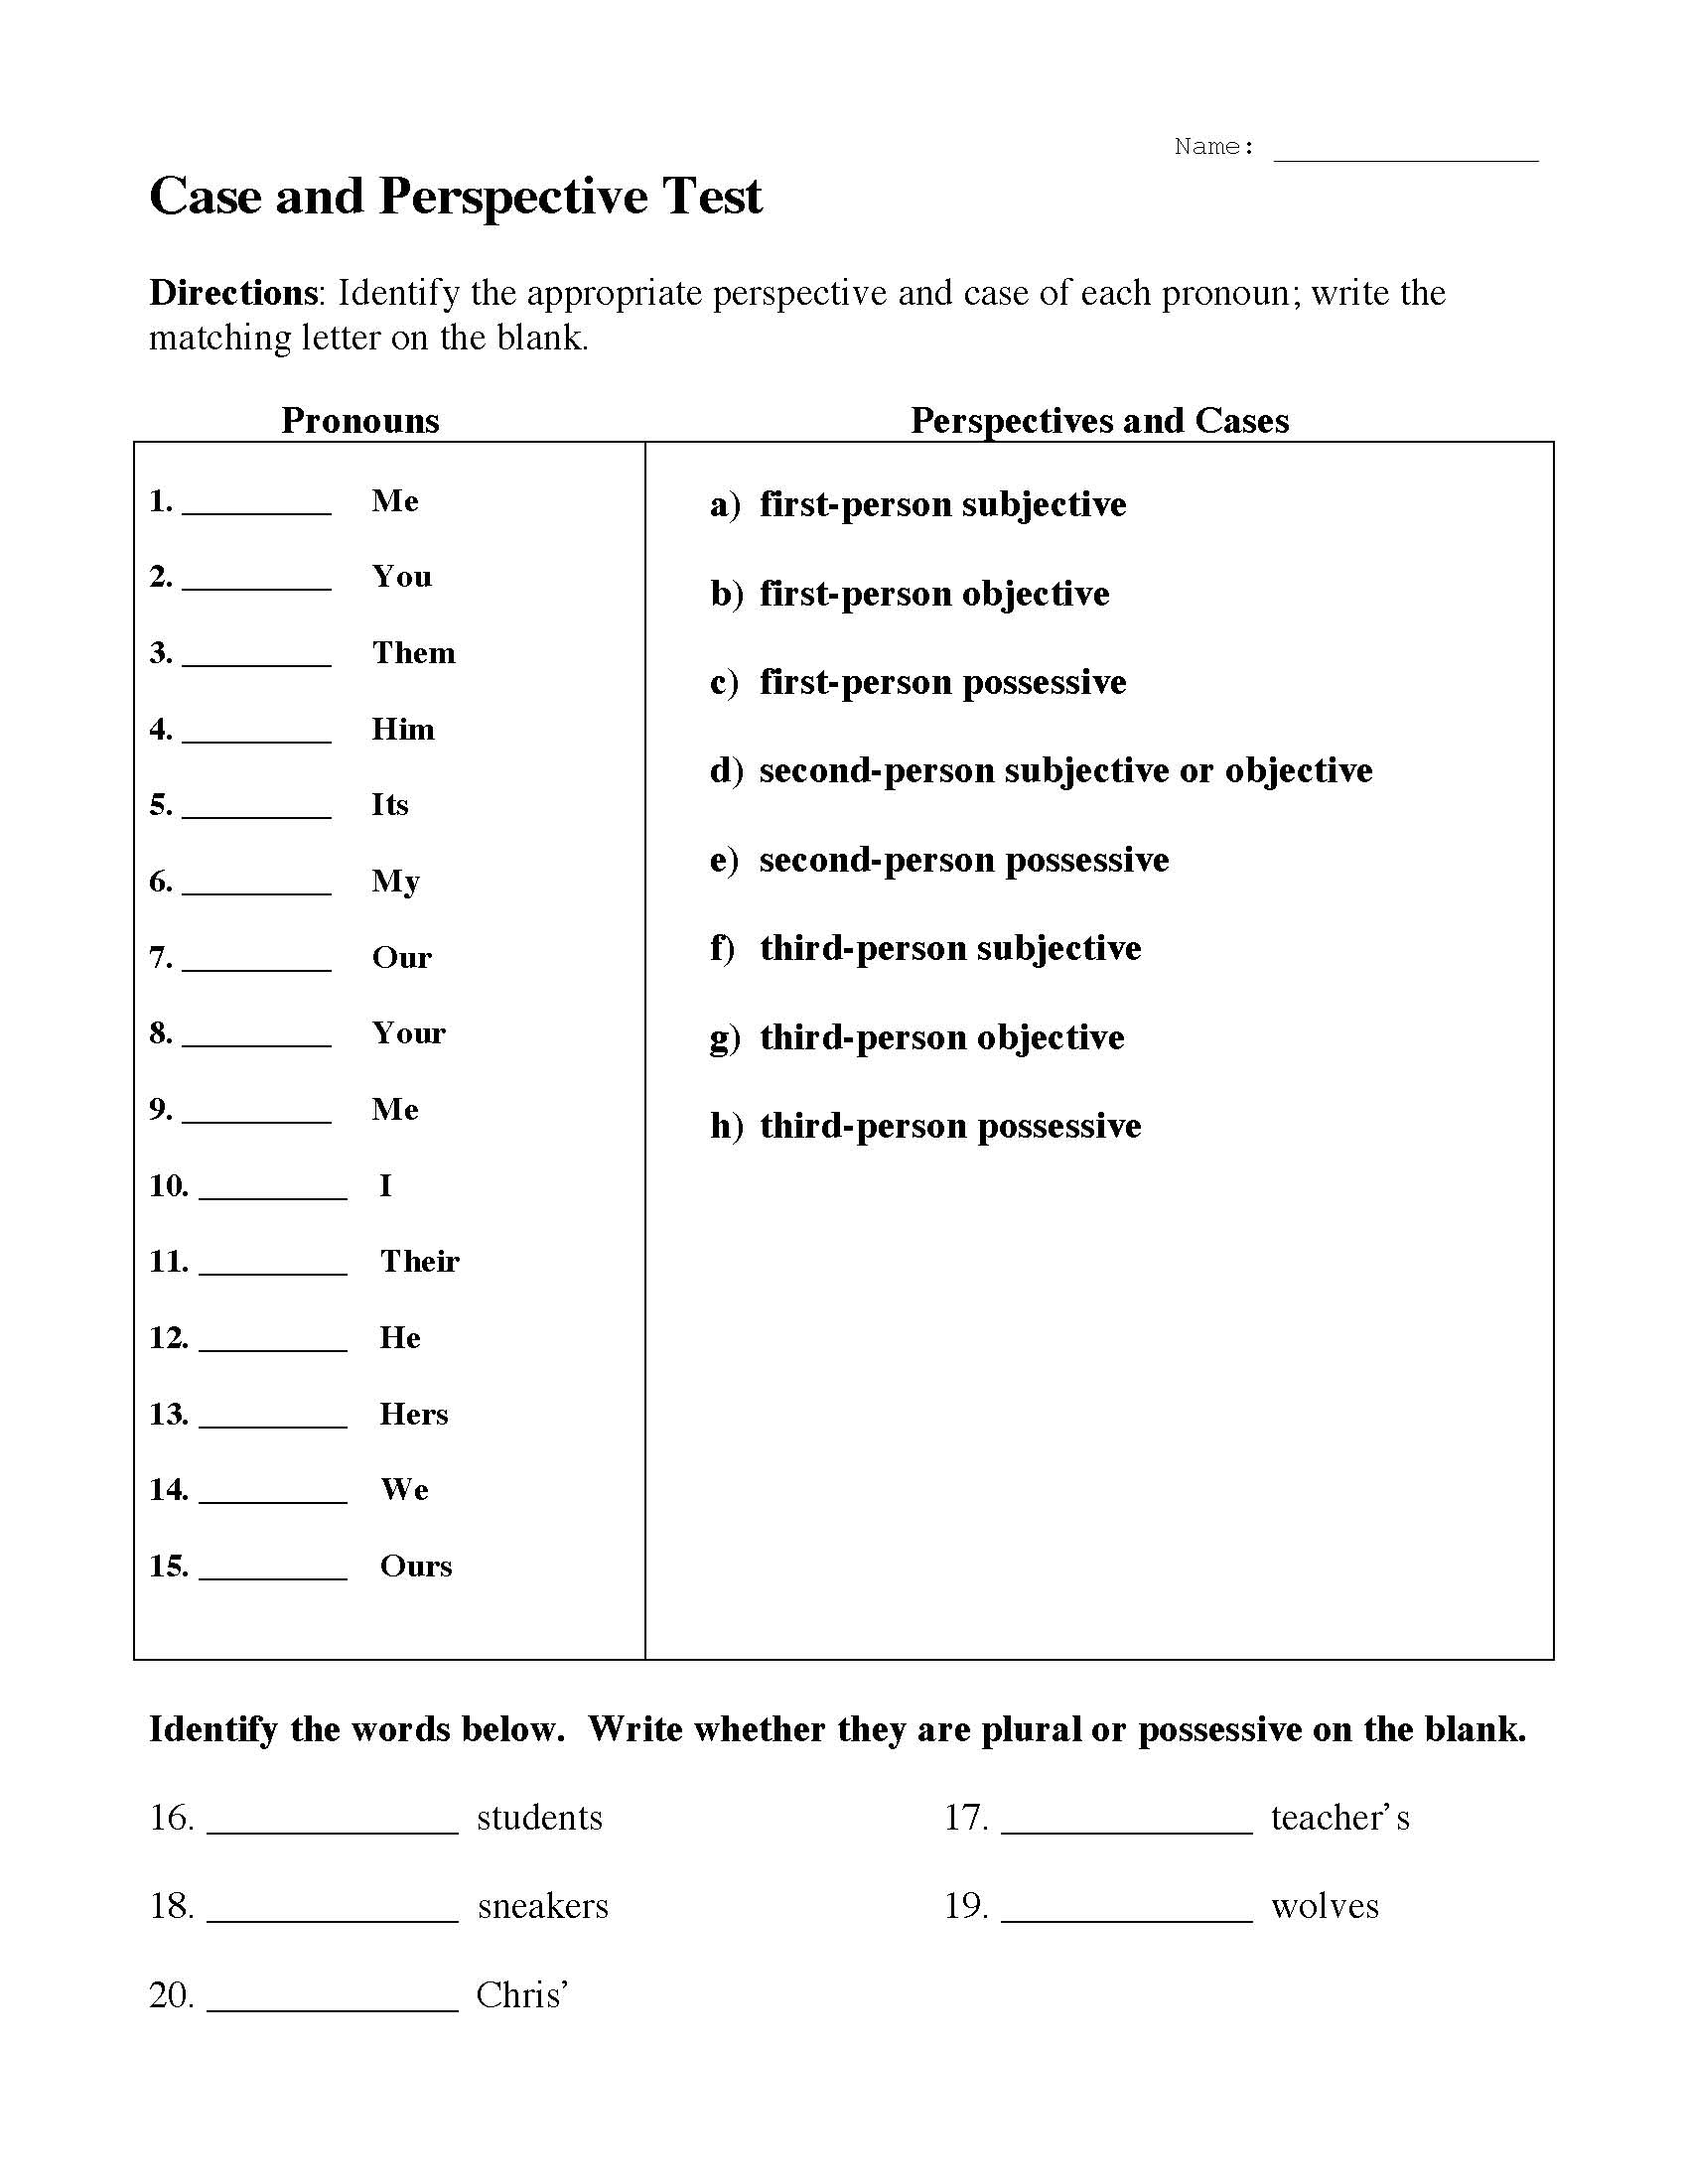 This is a preview image of the Pronoun Case and Perspective Quiz.